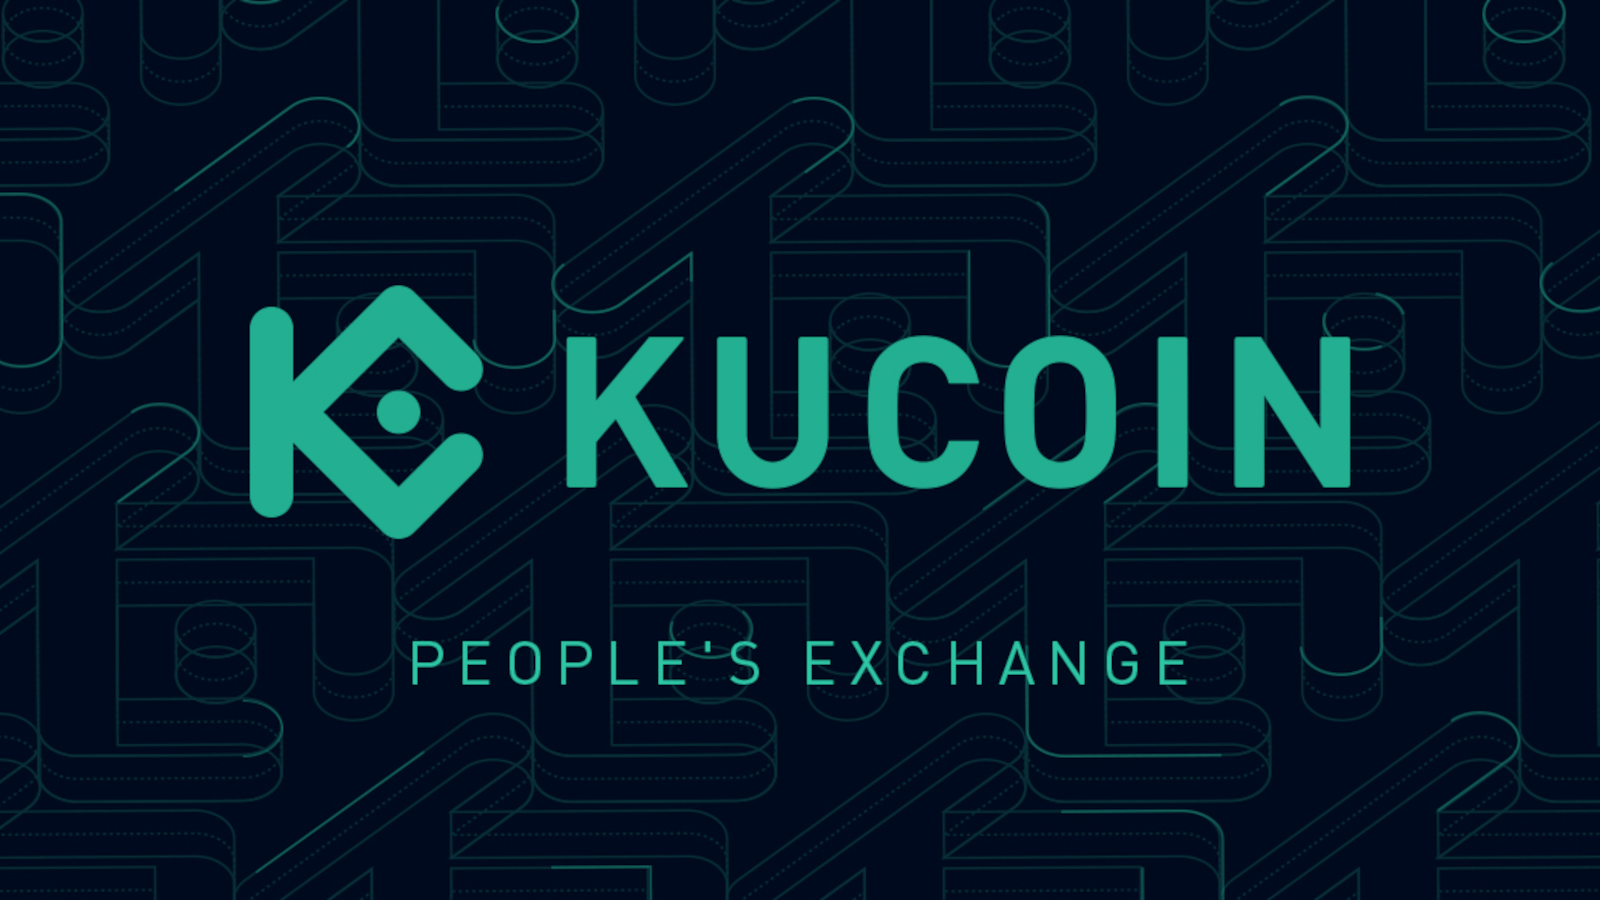 KuCoin Twitter Hack Leads to Loss of Funds - cointime.fun